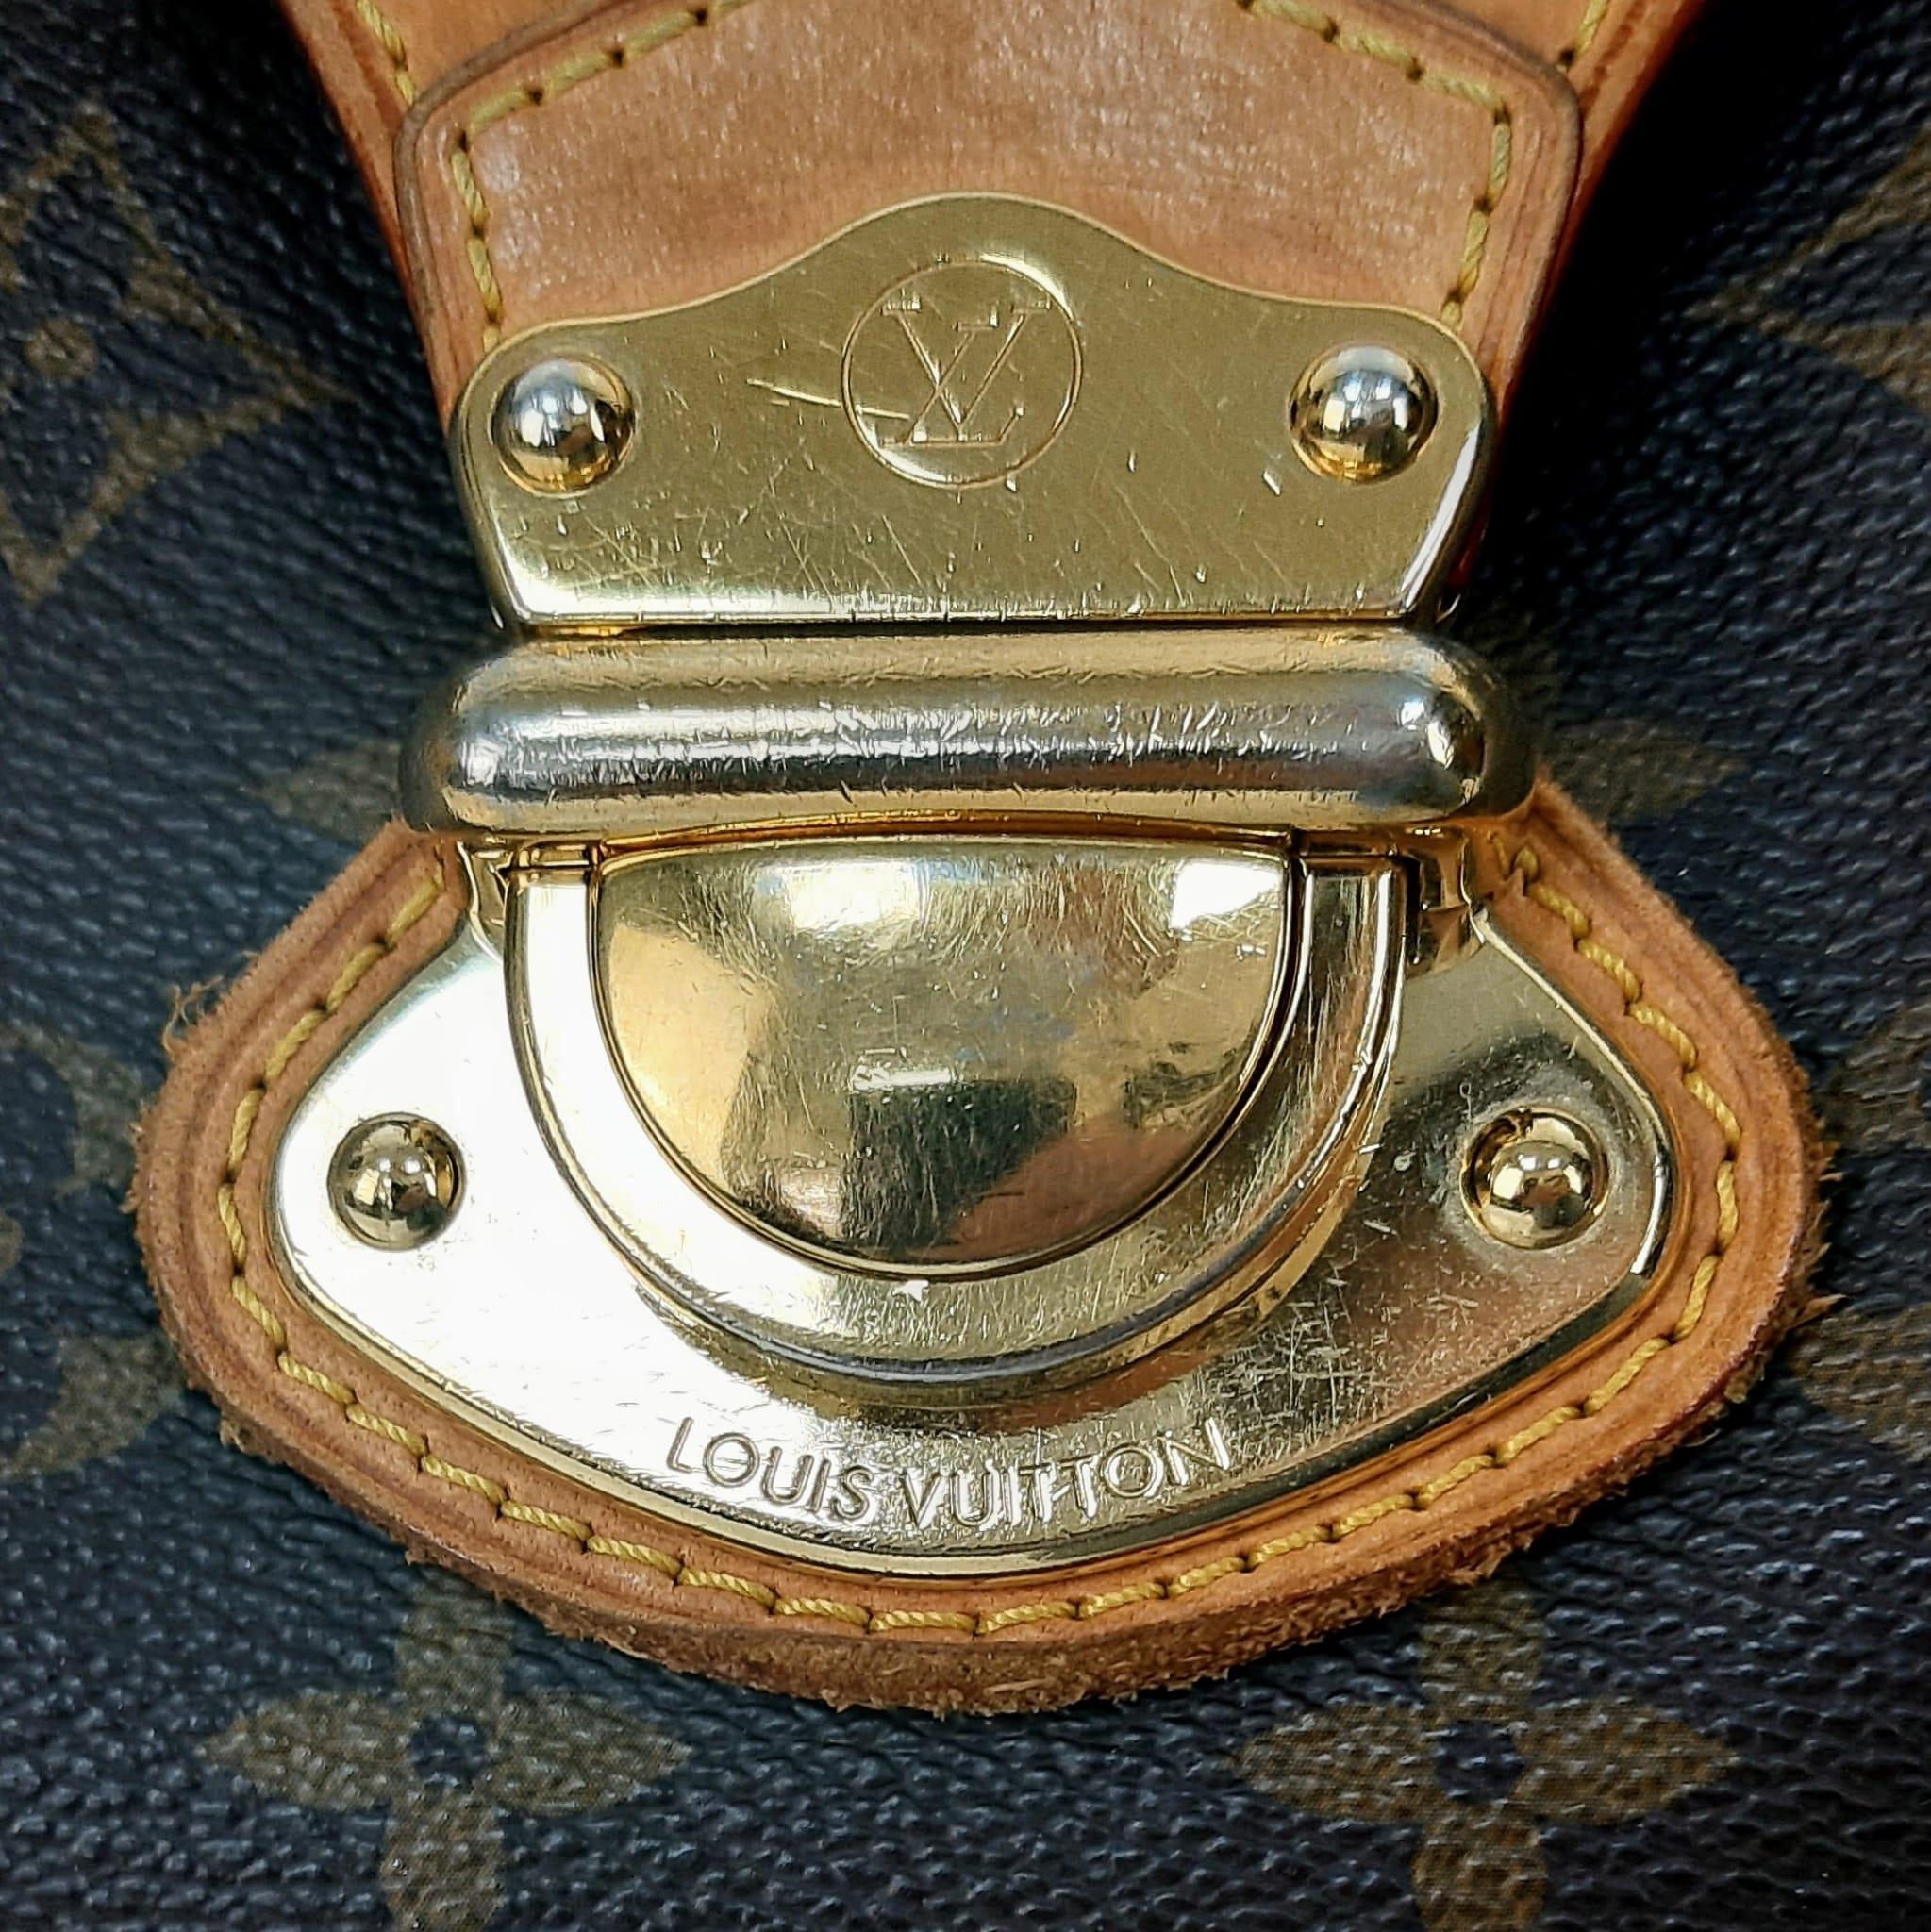 A Louis Vuitton Monogram Canvas Stresa PM Bag. Leather trim with gold-tone hardware. Nylon lined - Image 4 of 7